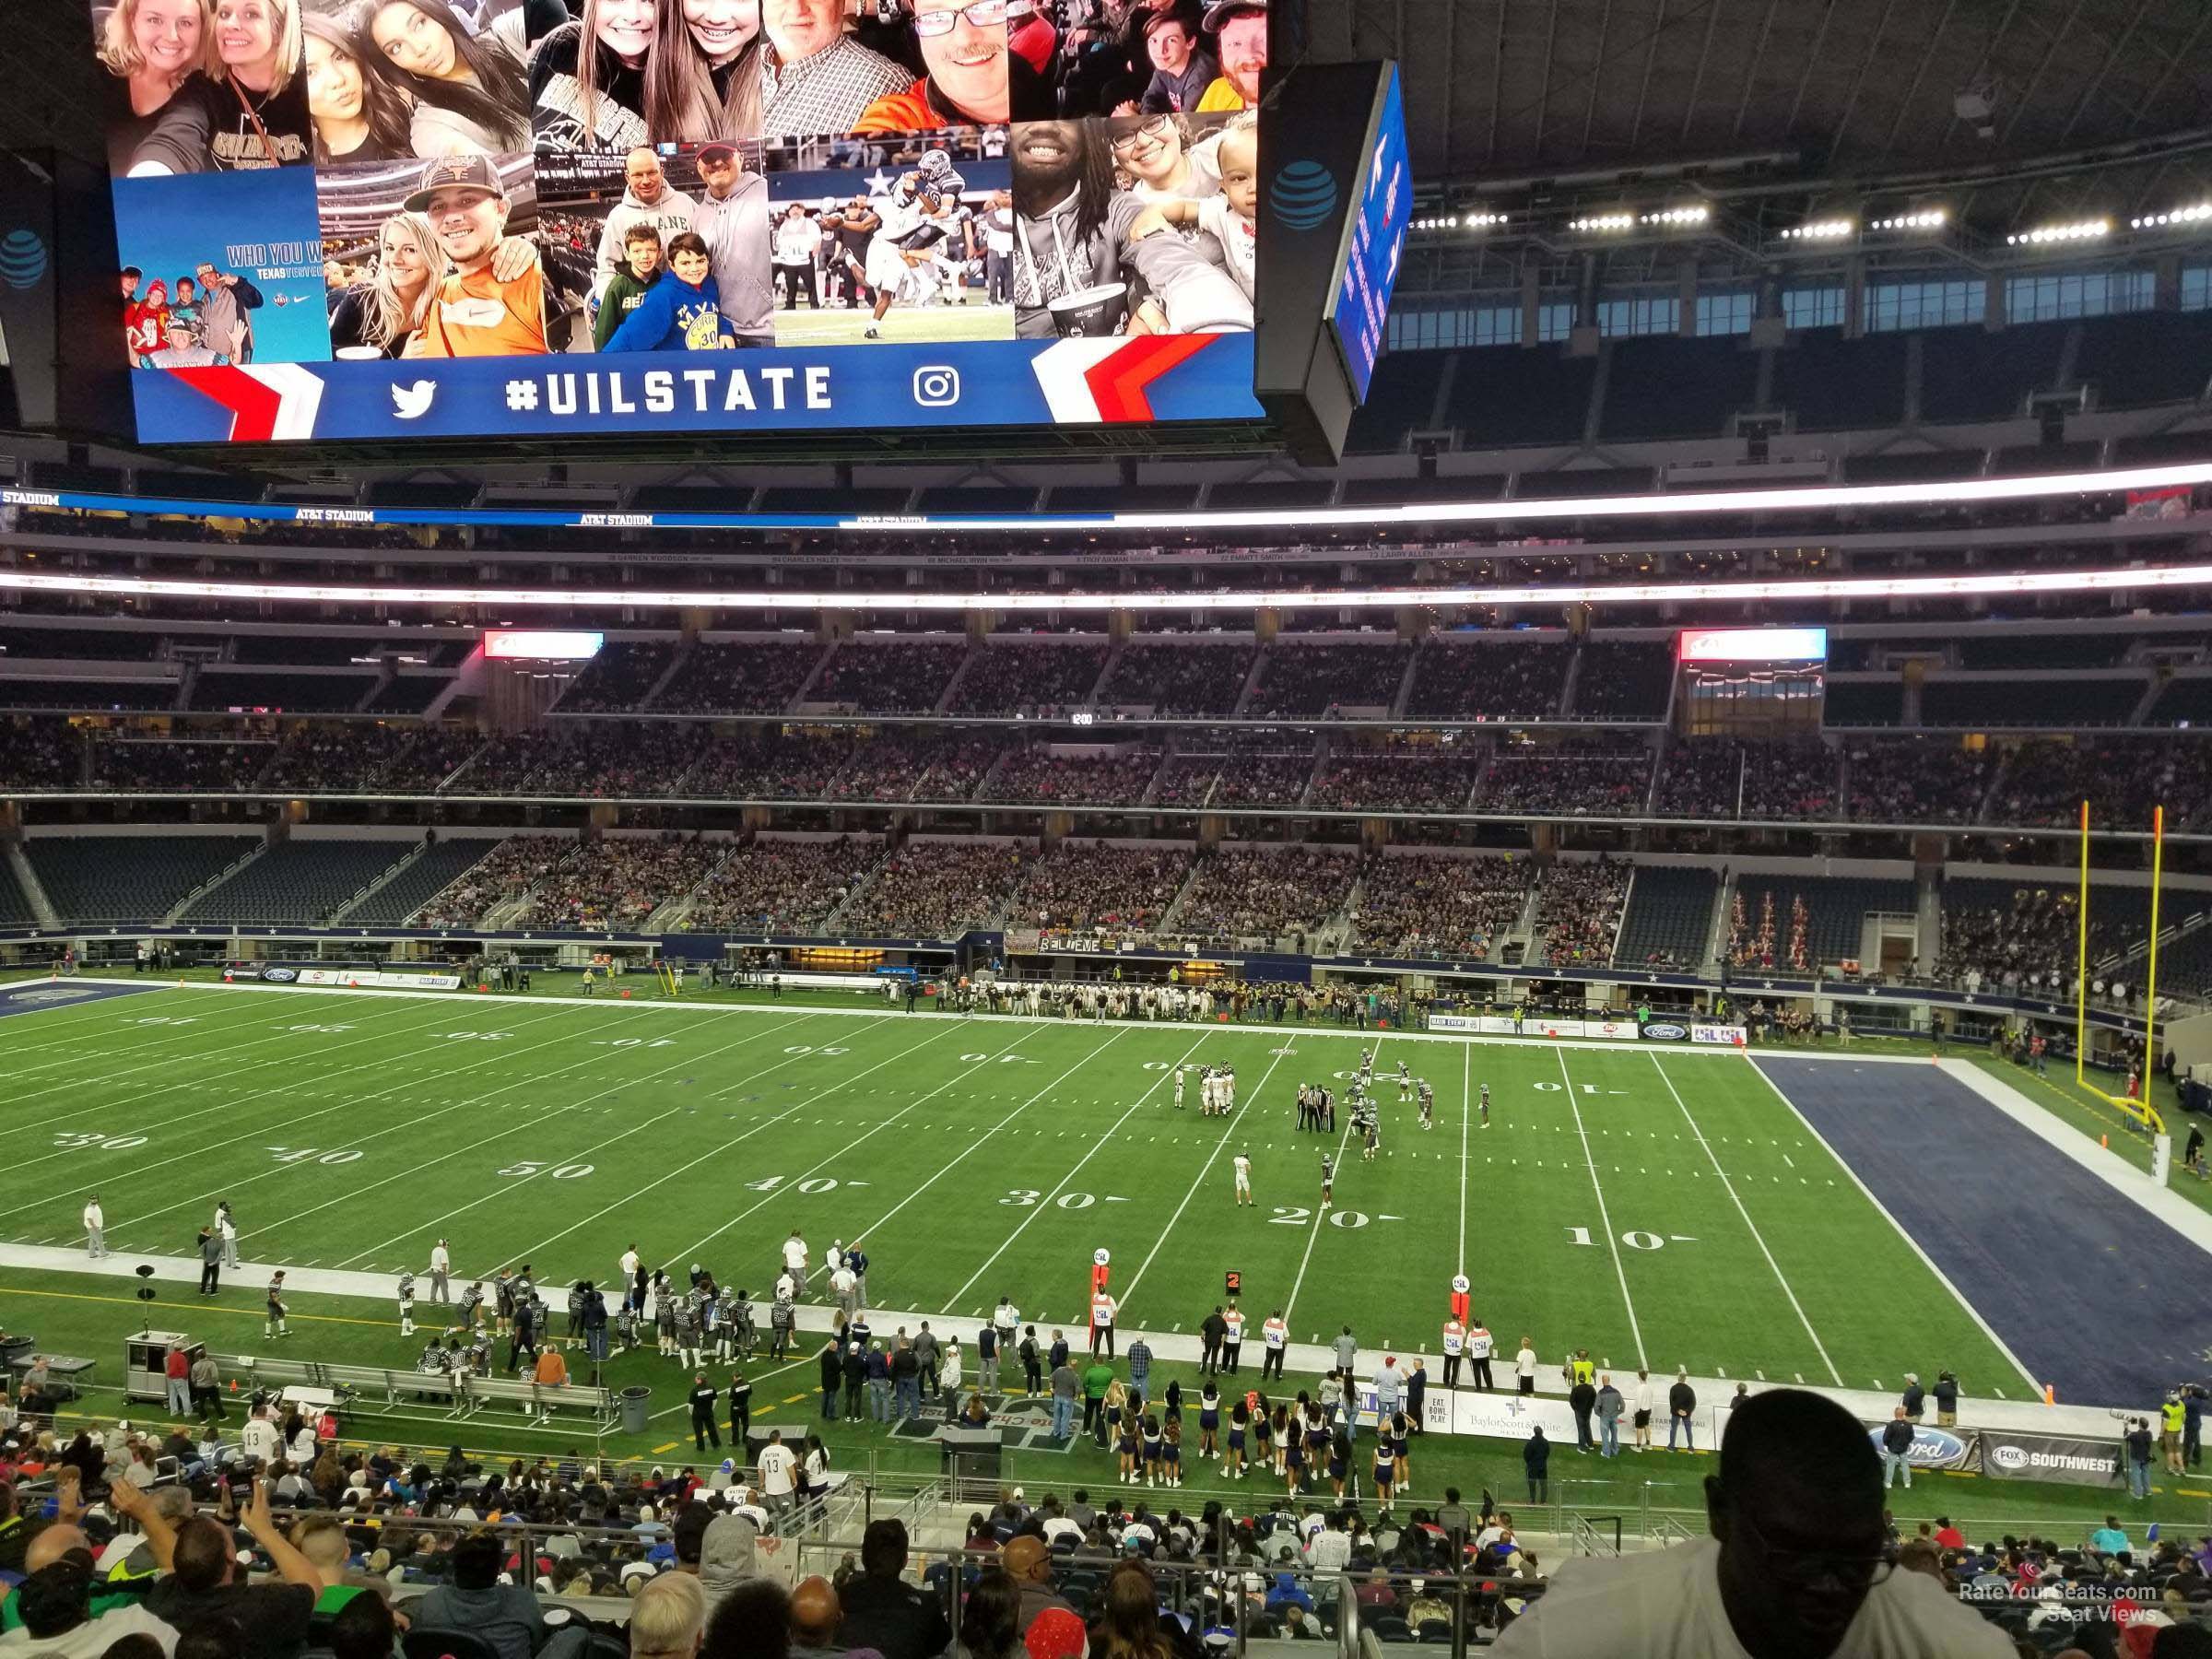 section c207, row 10 seat view  for football - at&t stadium (cowboys stadium)